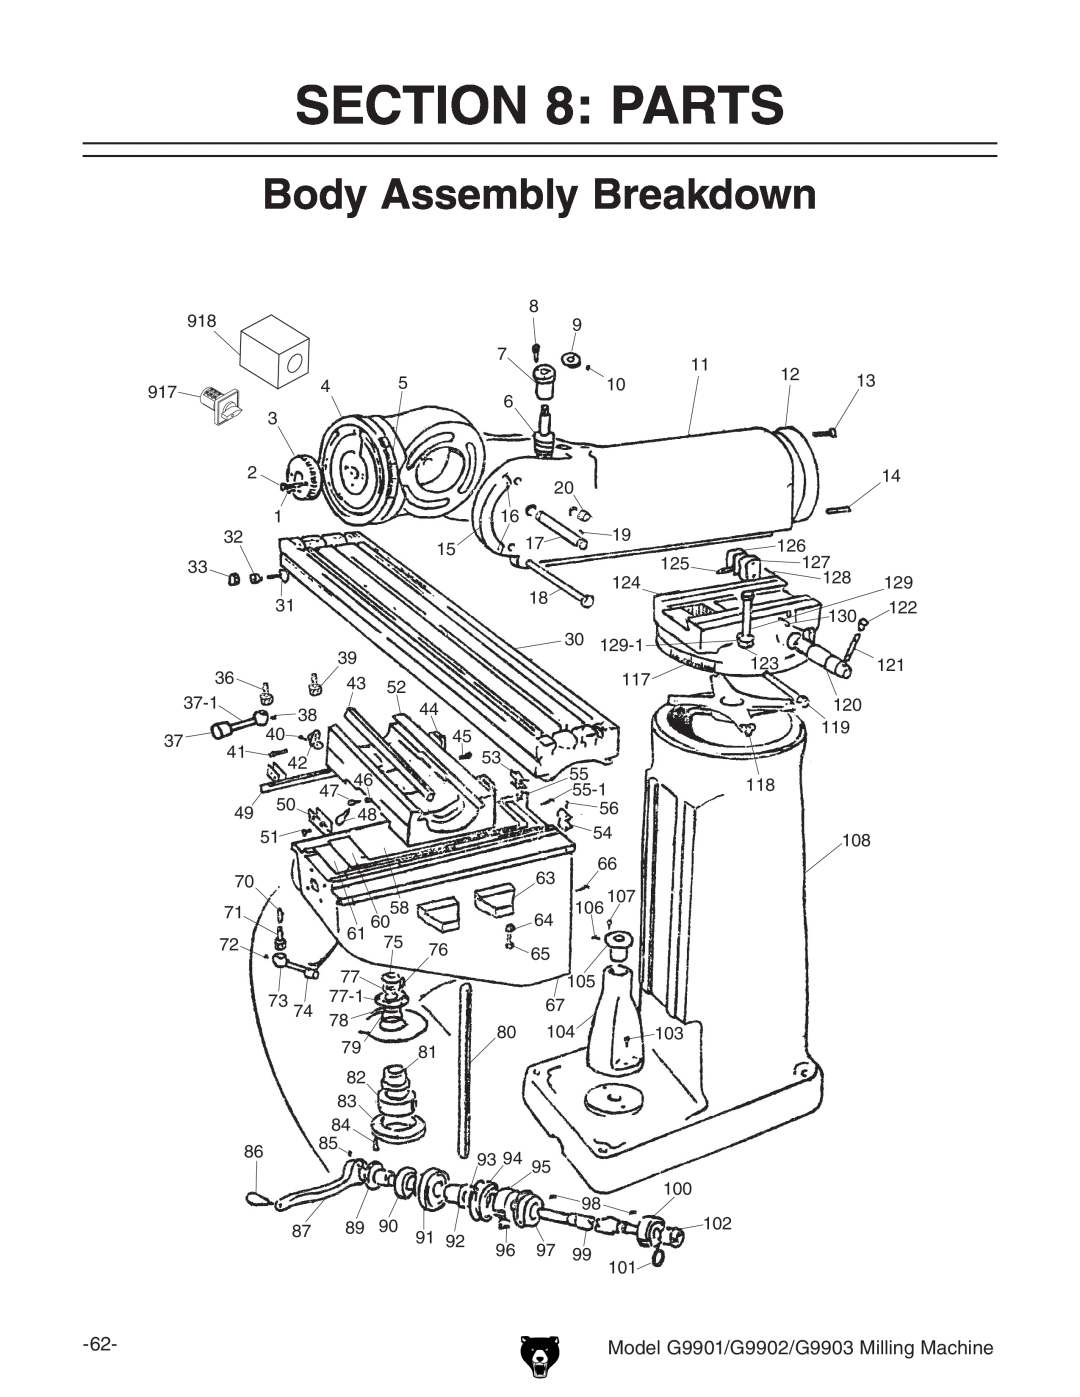 Grizzly manual Body Assembly Breakdown, Model G9901/G9902/G9903 Milling Machine, Parts 